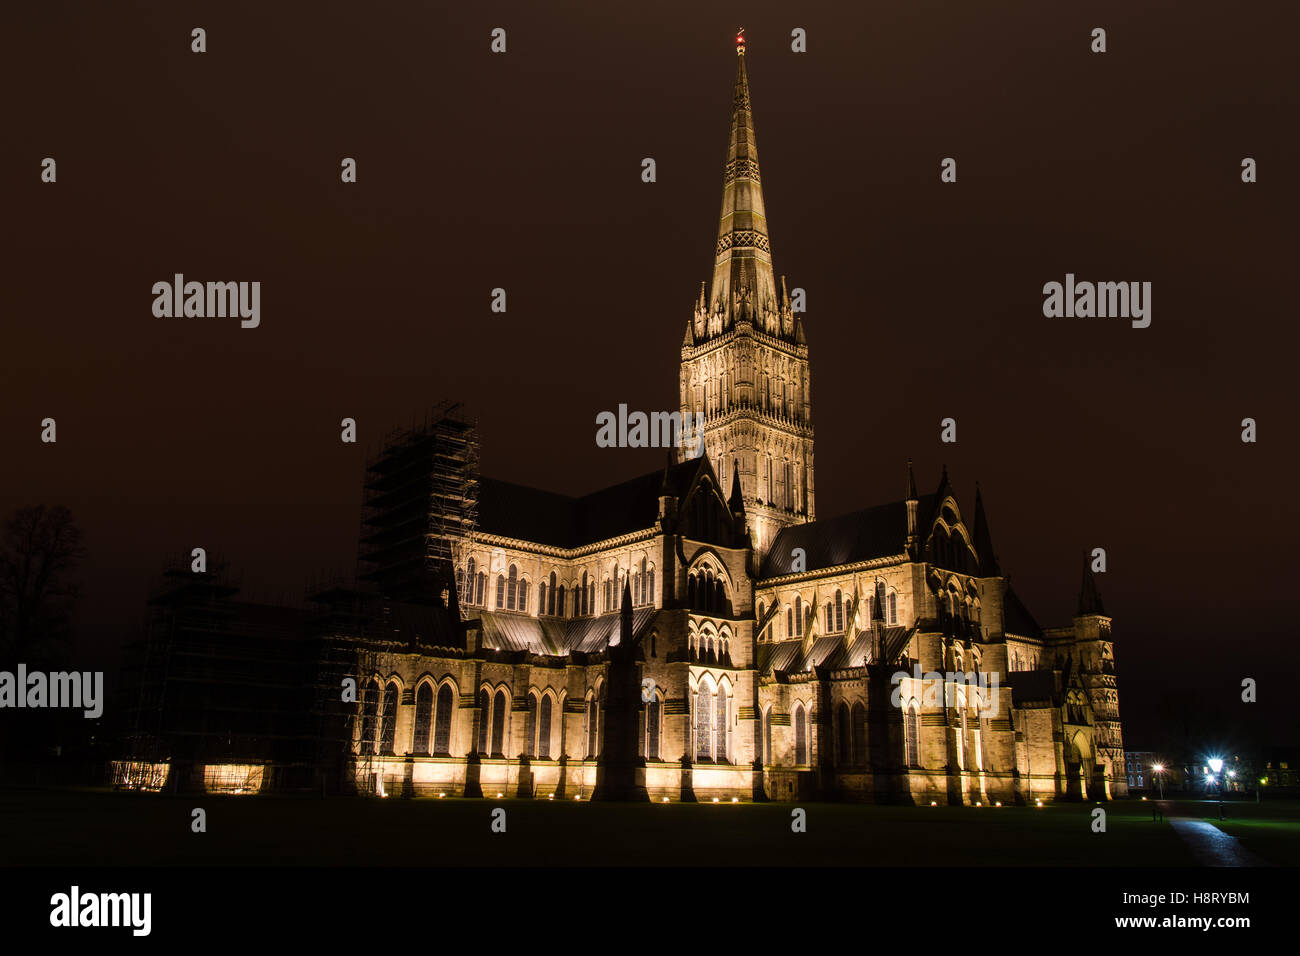 Salisbury Cathedral at night. Tallest spire in the UK on Anglican cathedral in early English architectural style Stock Photo